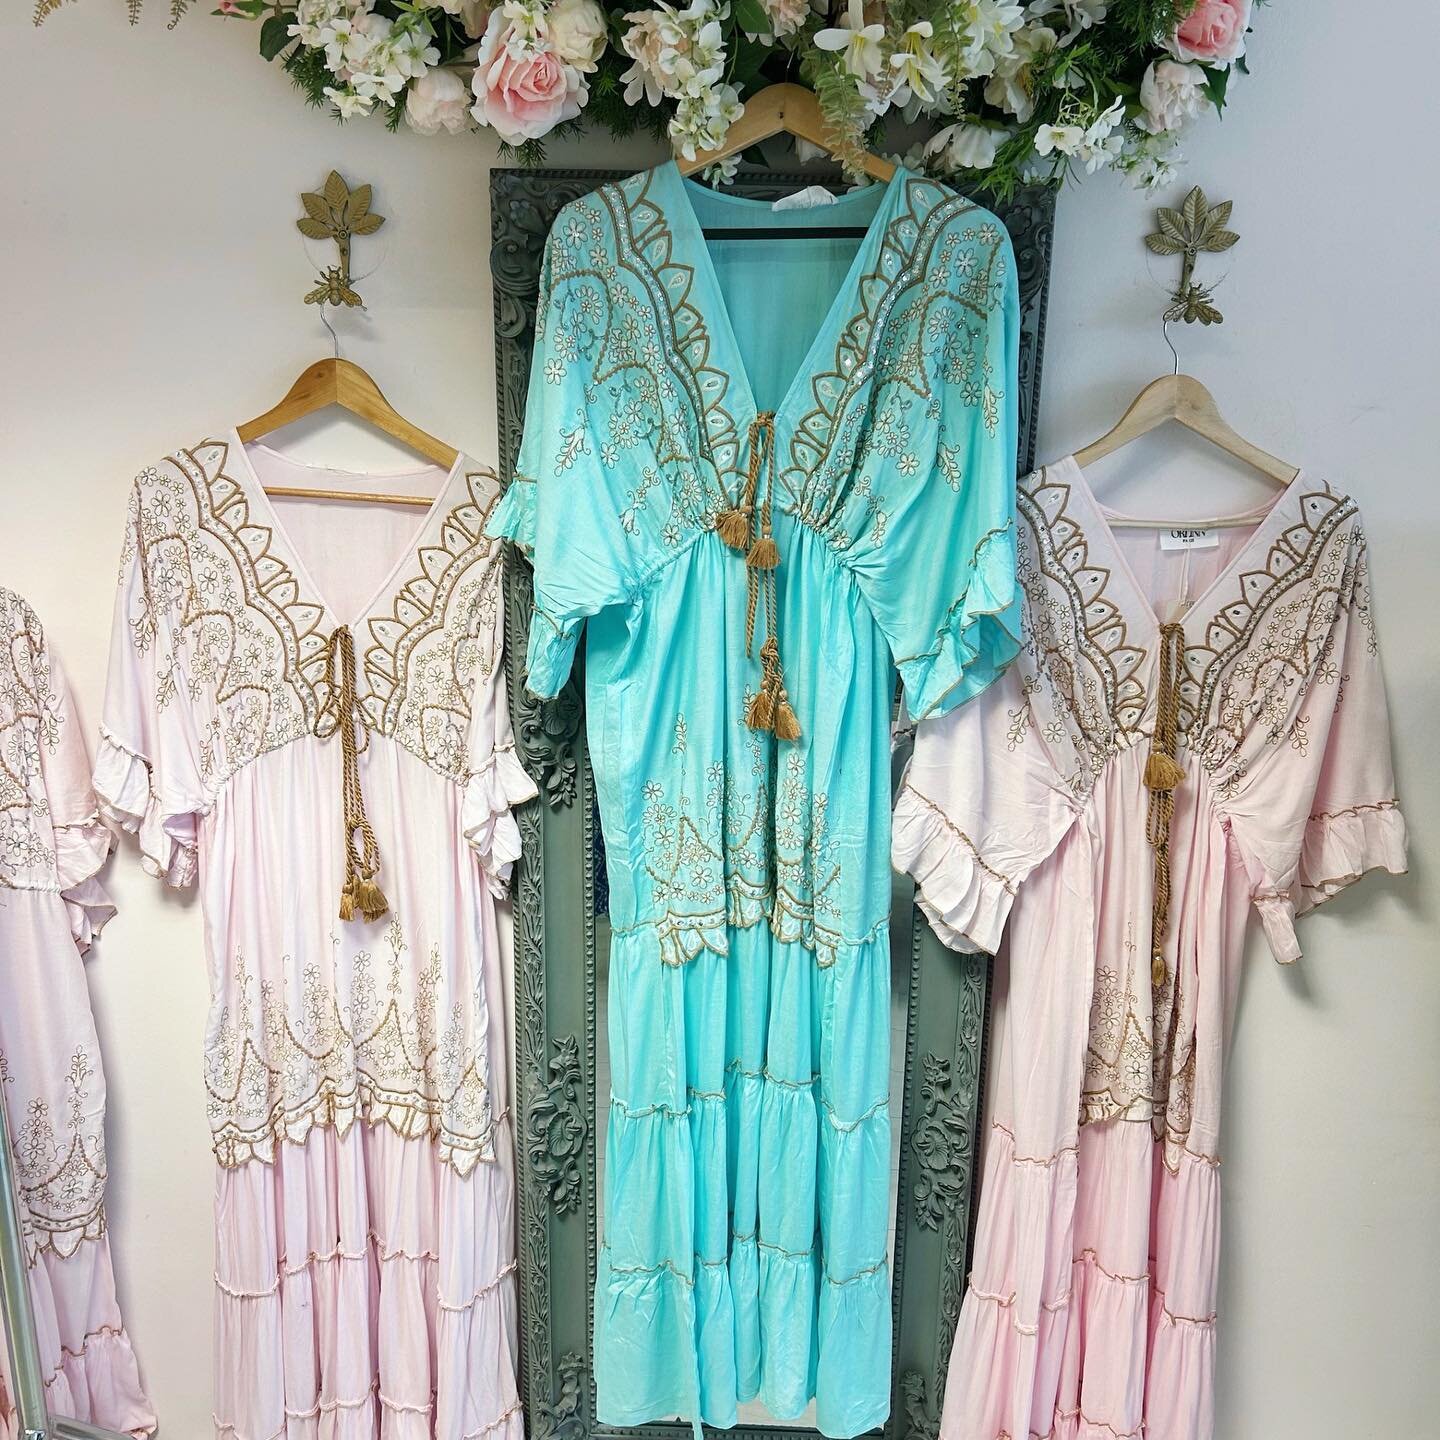 New arrivals, this beautiful piece is the perfect beach to bar dress. Which do you prefer, pink or turquoise? 
.
.
.
.
.
.
#HolidayStyleGuide #HolidayFashionInspo #BeachwearStyle #SuenoBoutique #SuenoStyle #Amersham